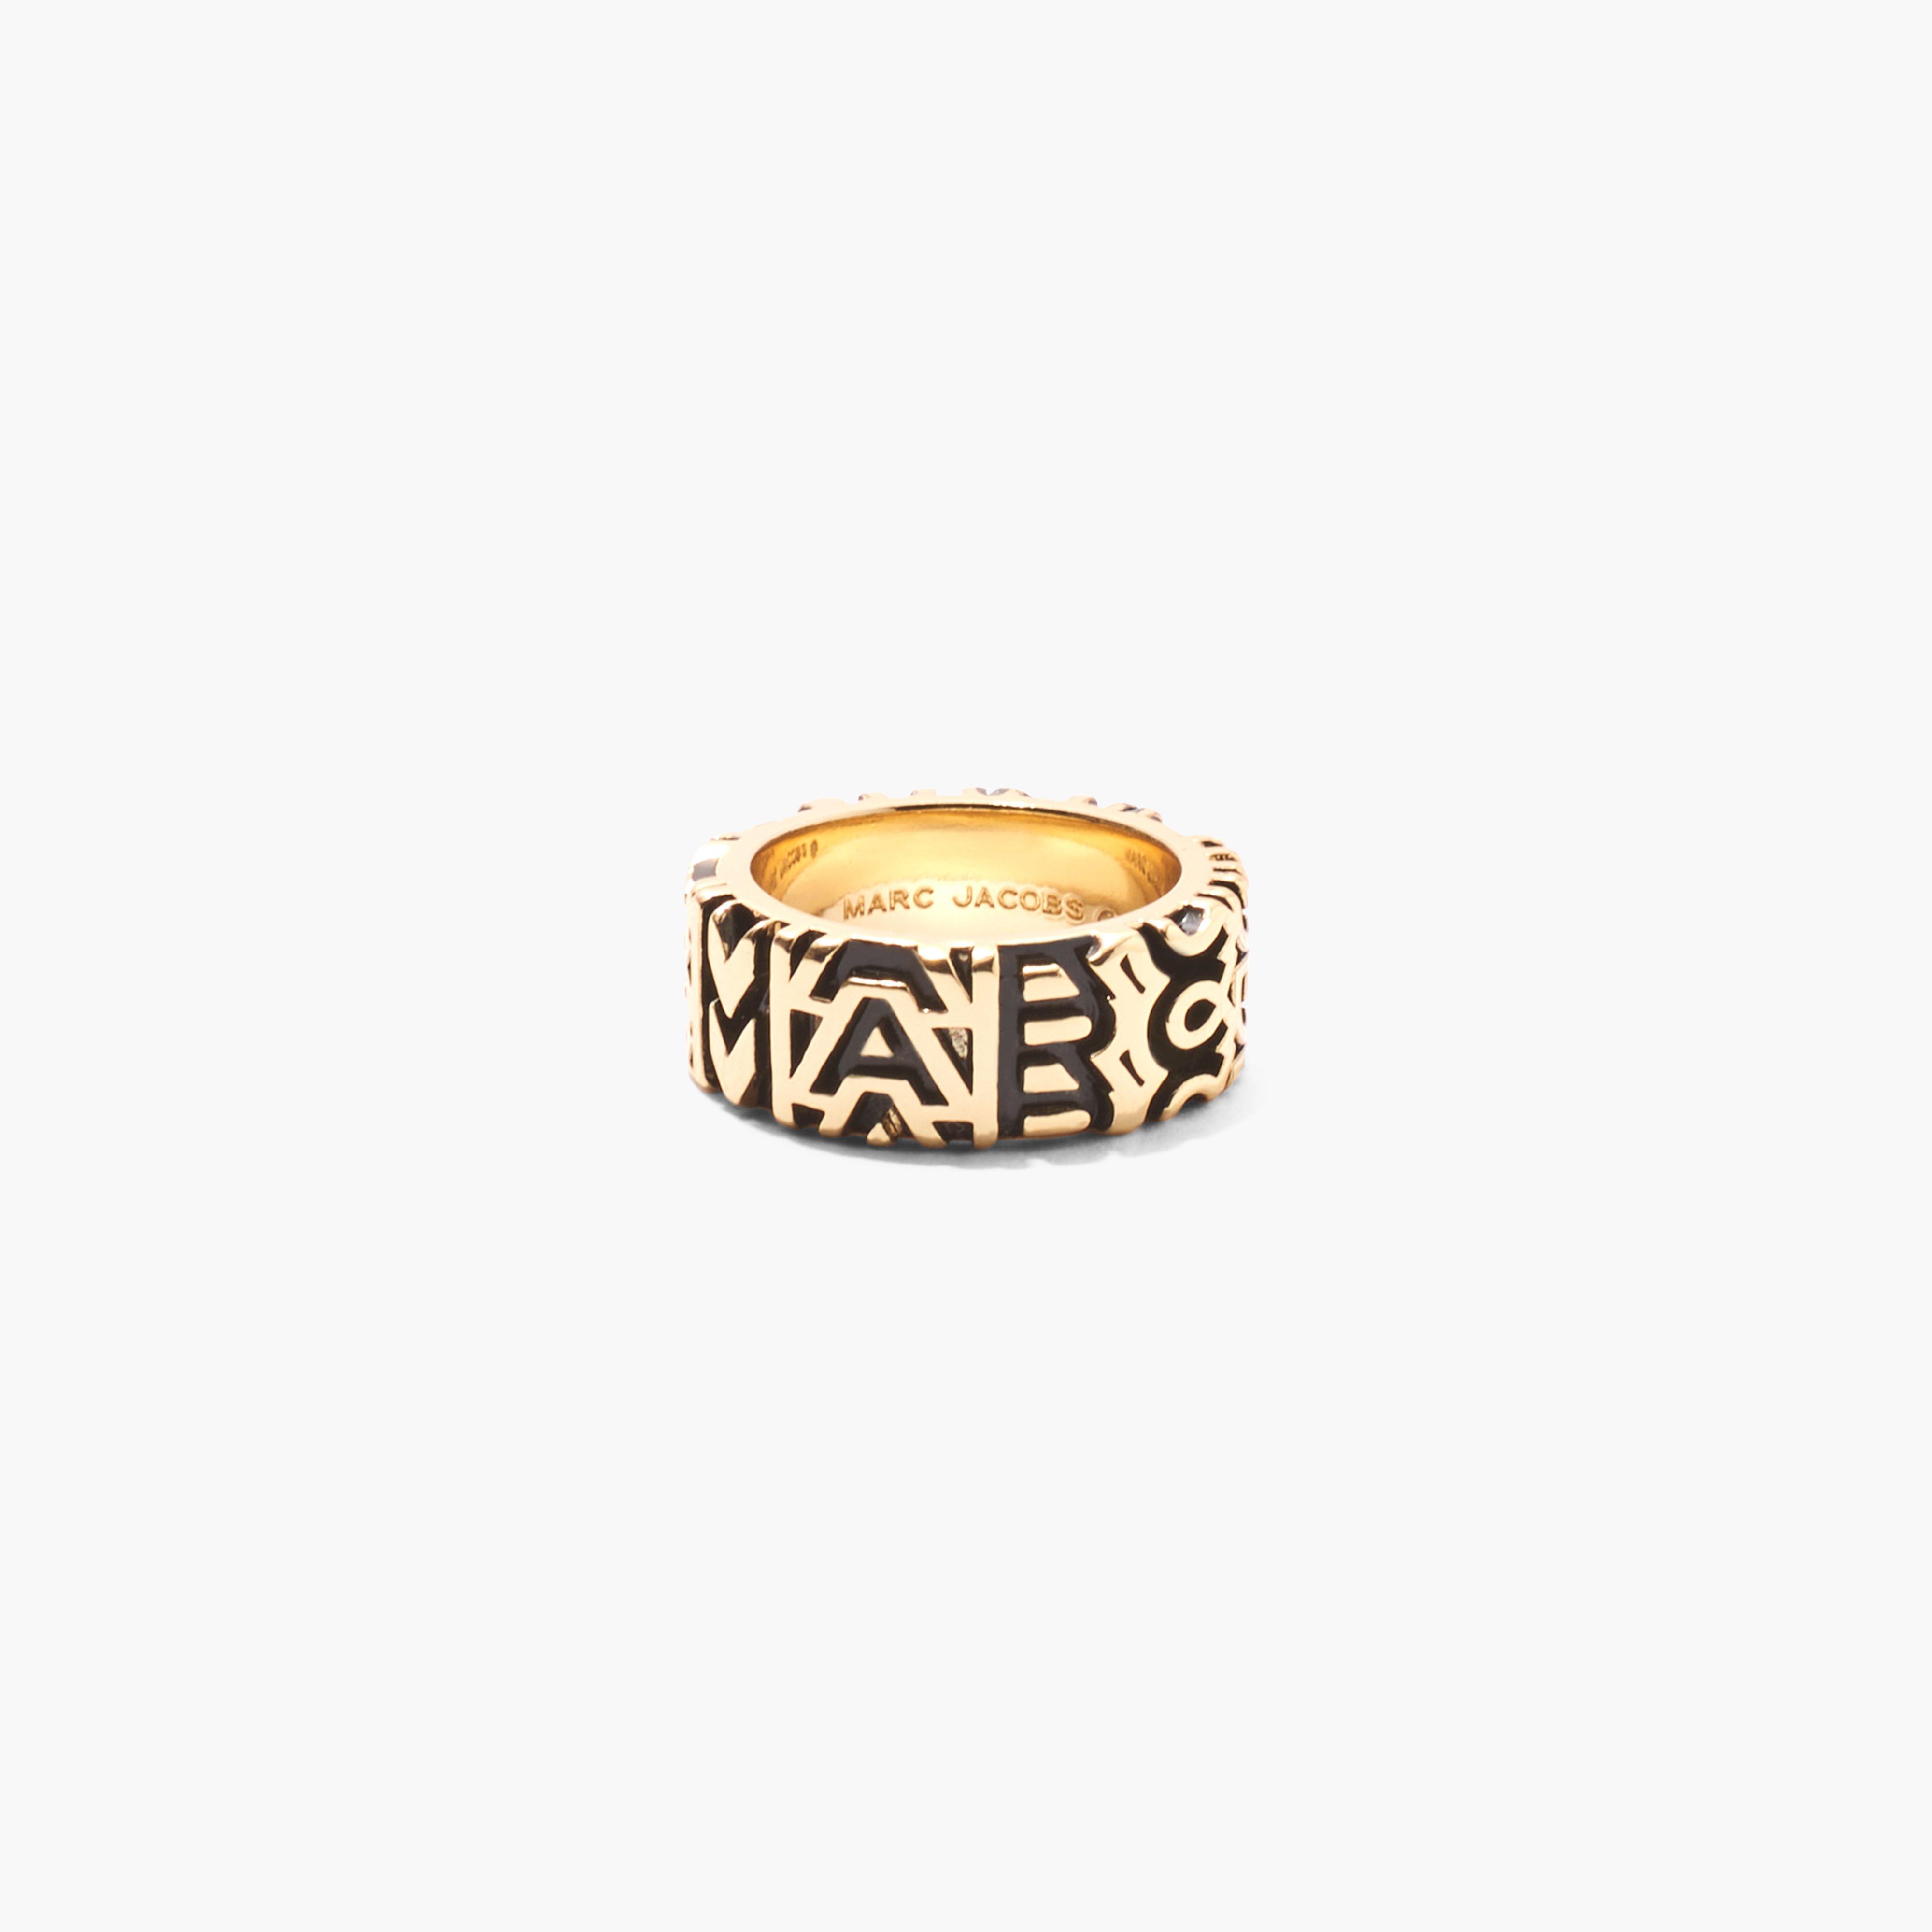 Marc by Marc jacobs The Monogram Engraved Ring,AGED GOLD